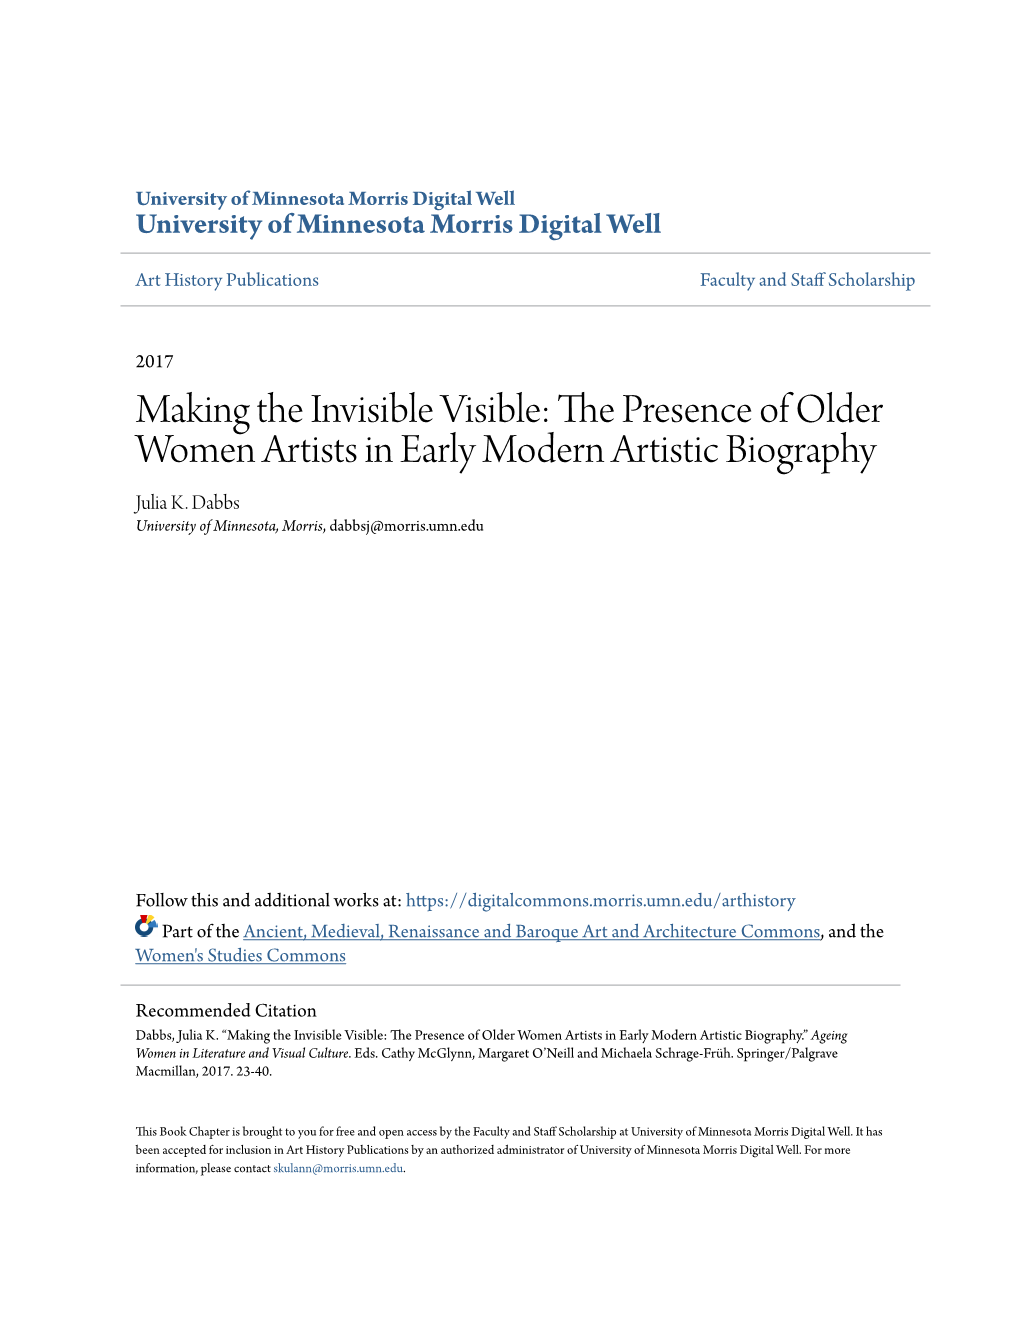 Making the Invisible Visible: the Presence of Older Women Artists in Early Modern Artistic Biography